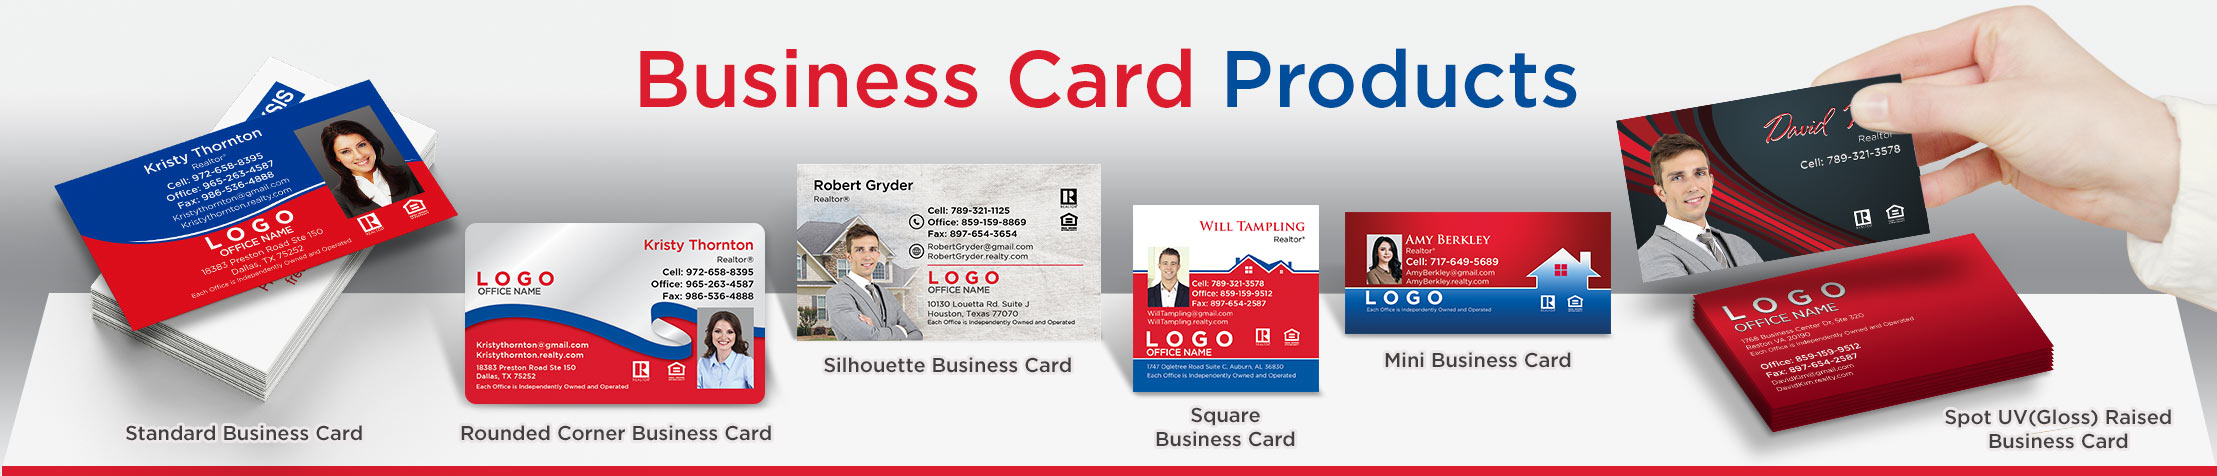 remax approved business cards 5